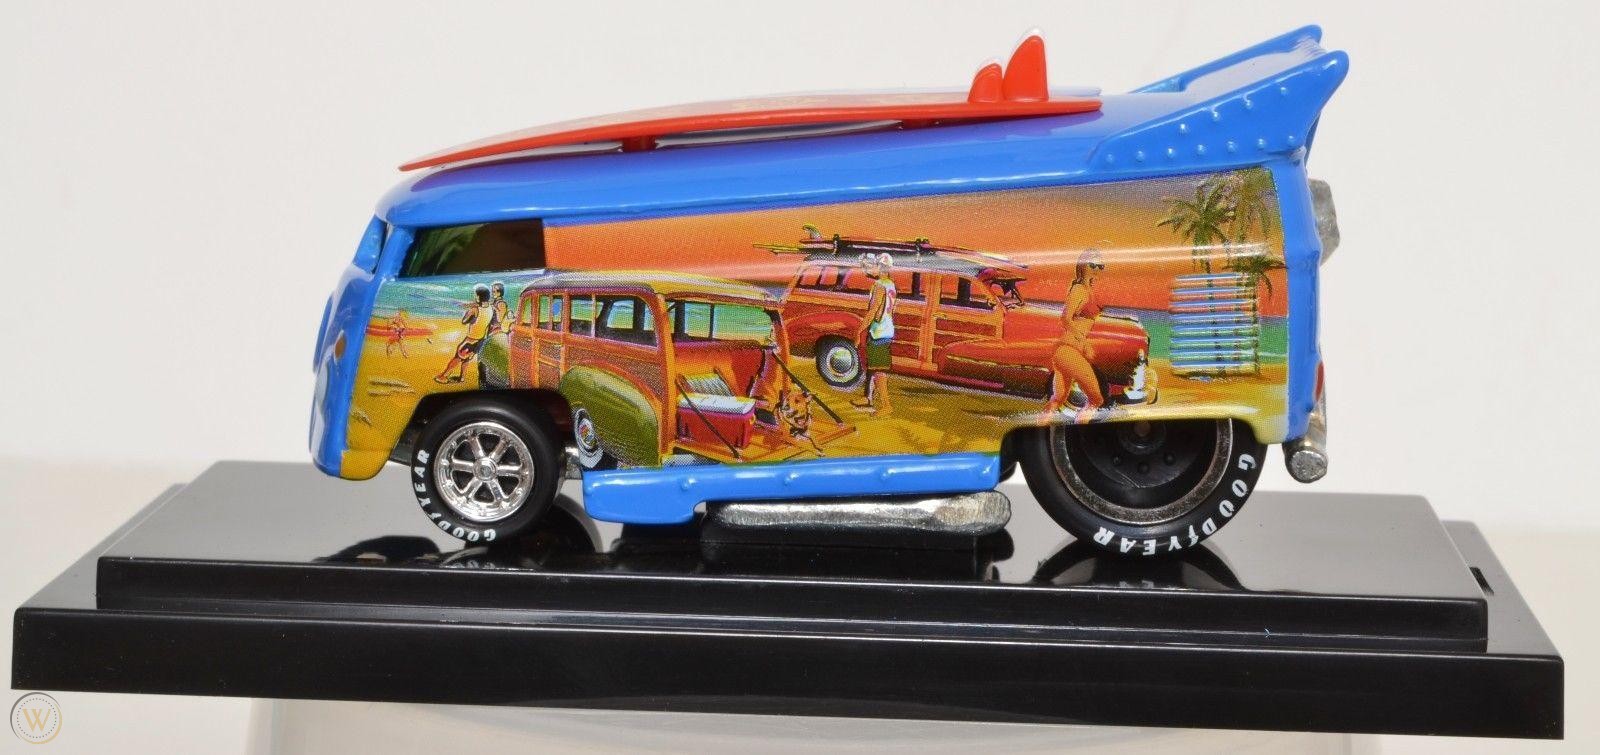 HOT WHEELS VW BUS LIBERTY PROMOTIONS SURFIN' SERIES